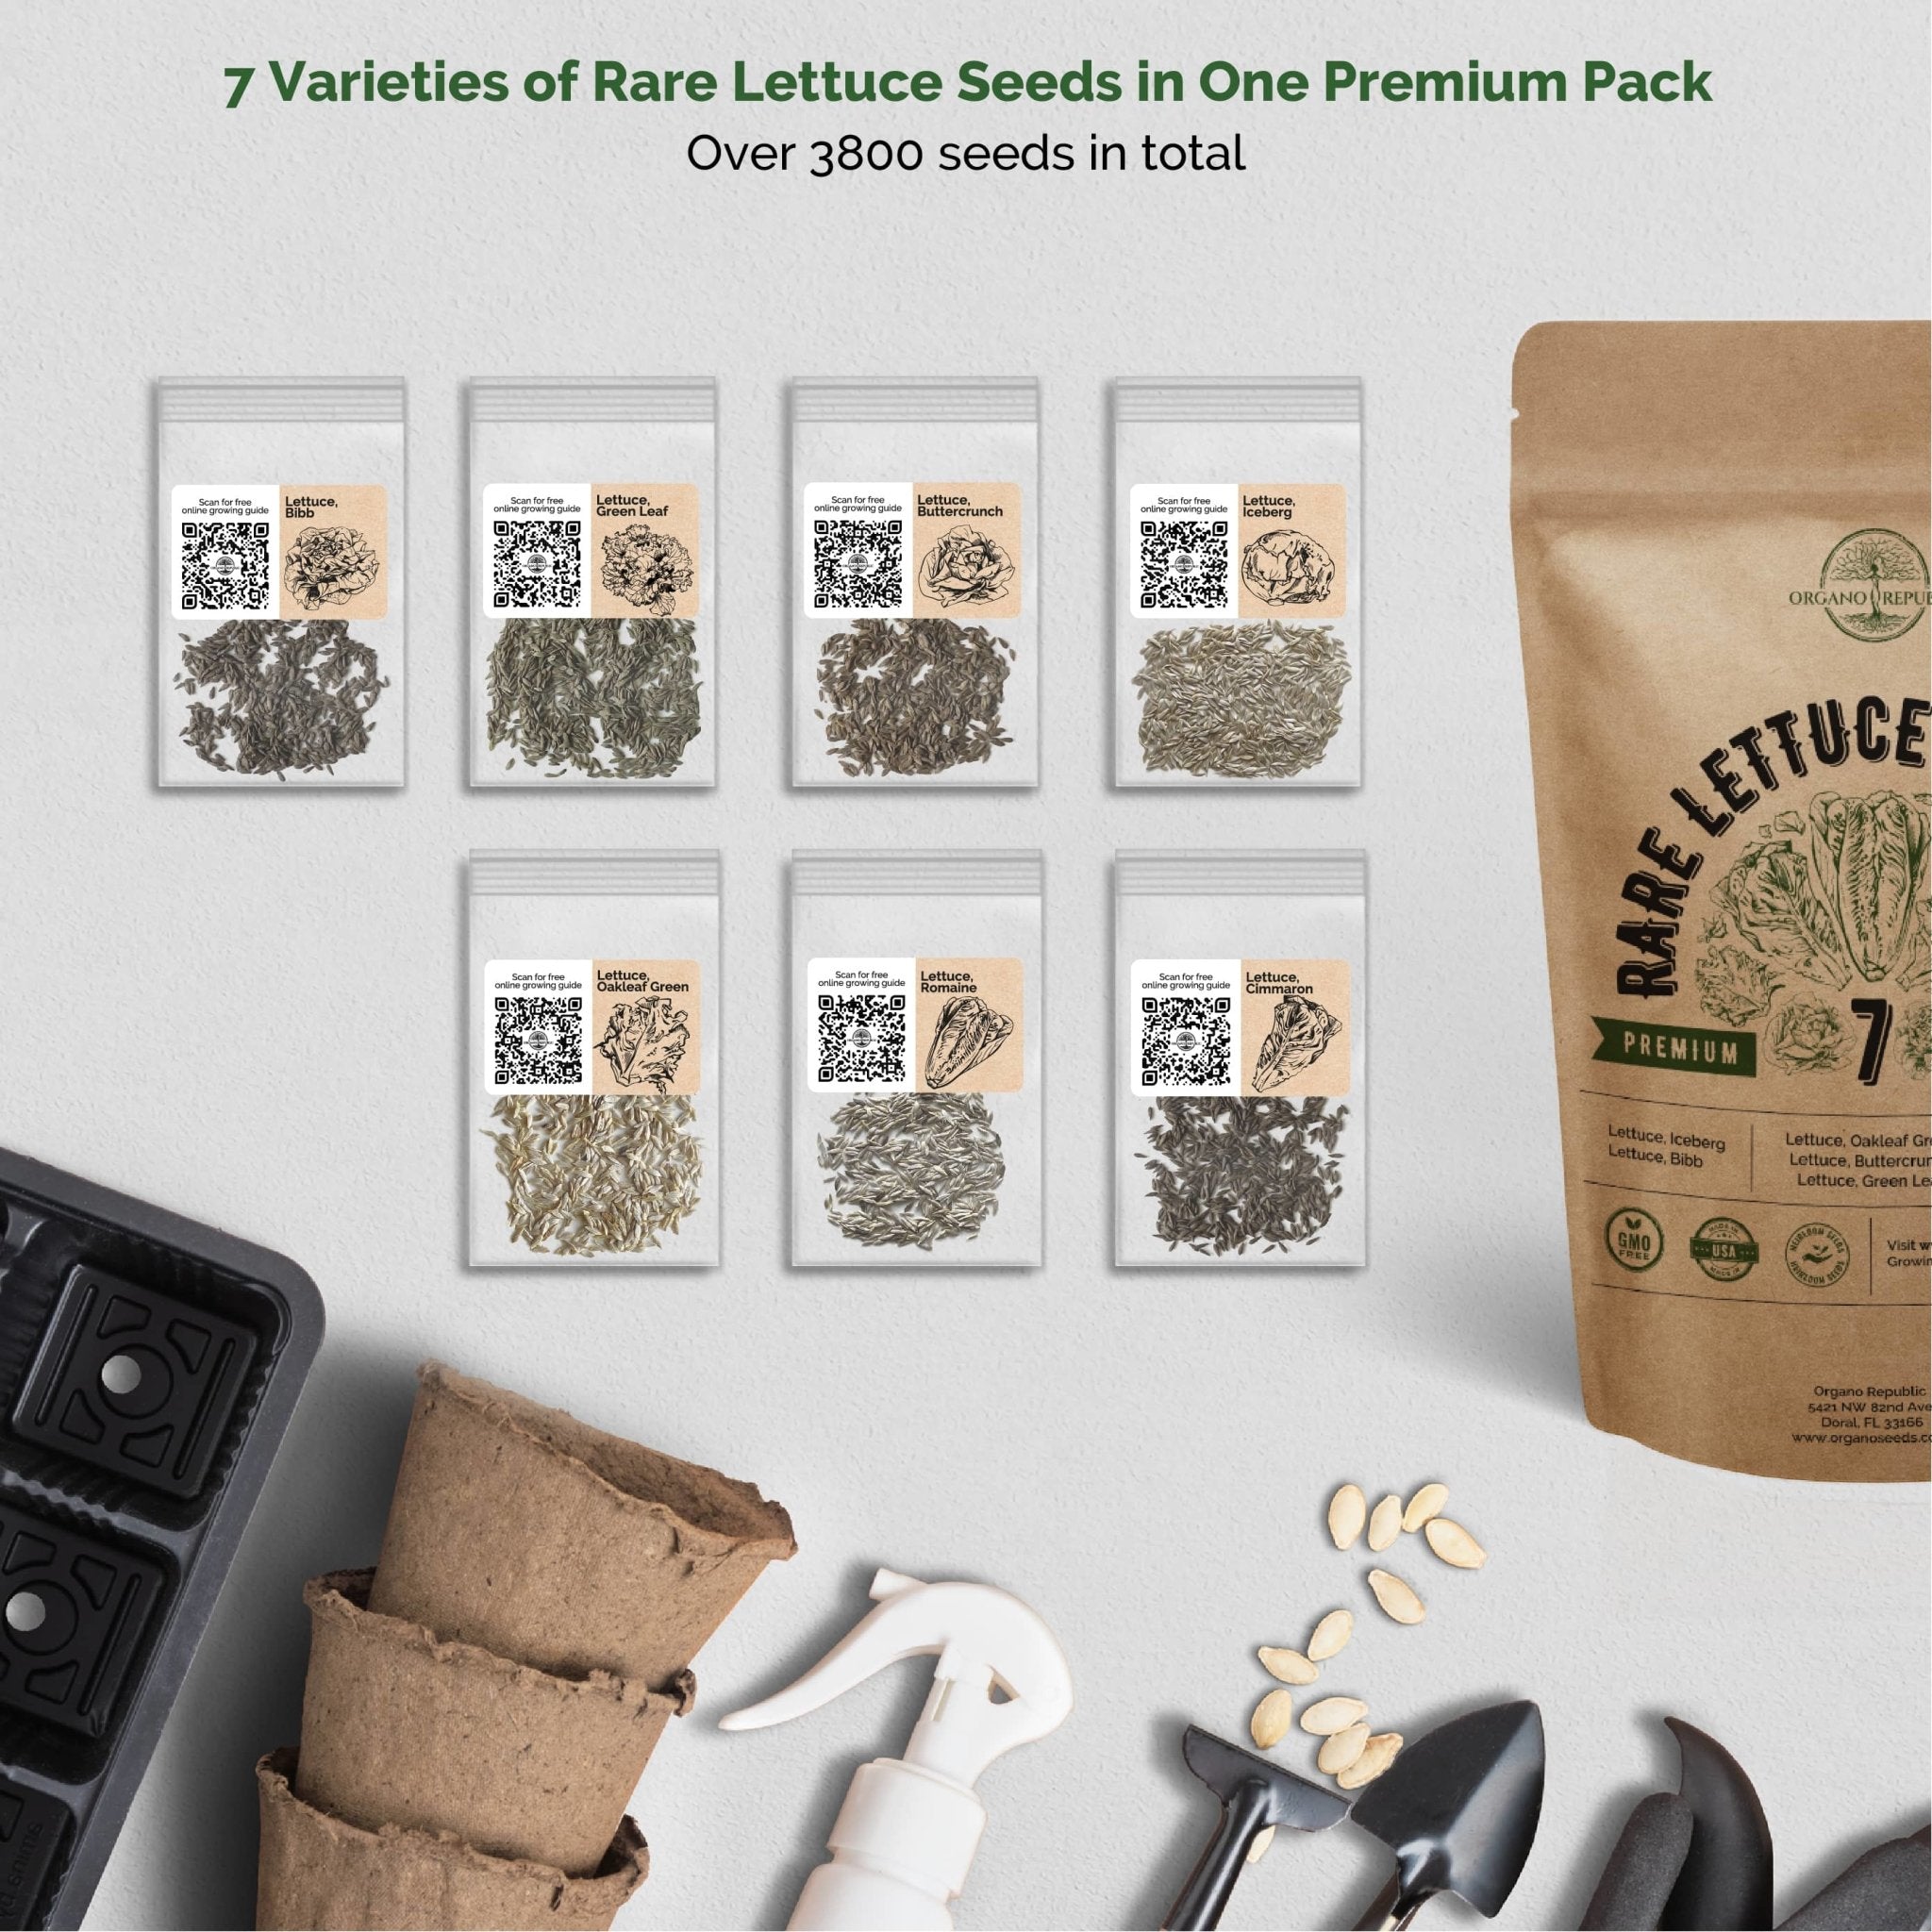 Salad Seeds Variety Pack - 7 Lettuce Seeds Variety Pack - Over 3800 Non-GMO, Heirloom Seeds